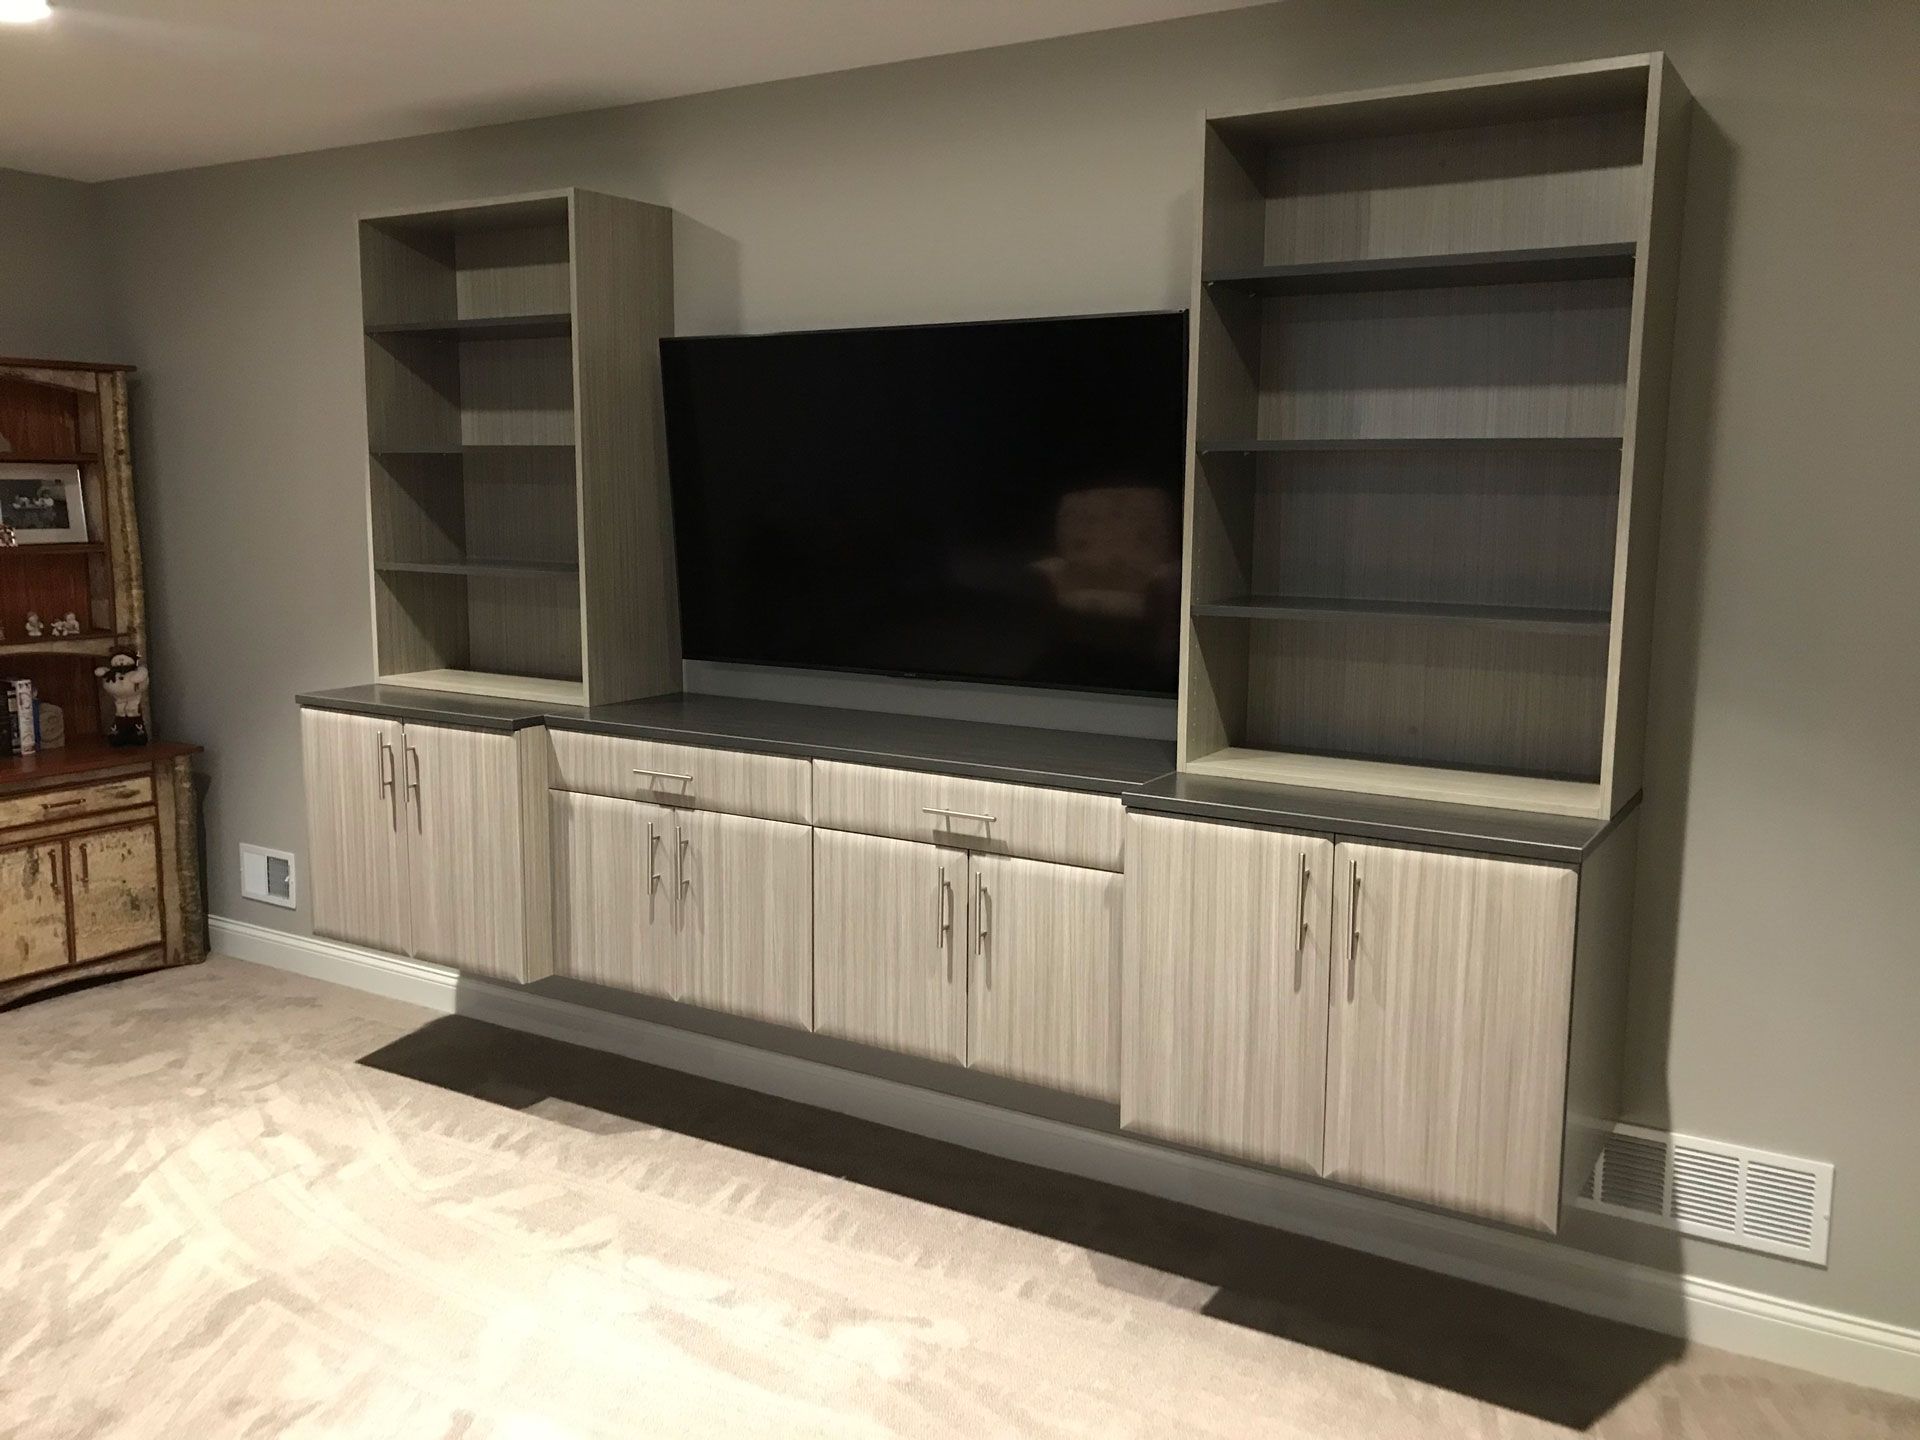 Custom Entertainment System Cabinets and Shelving